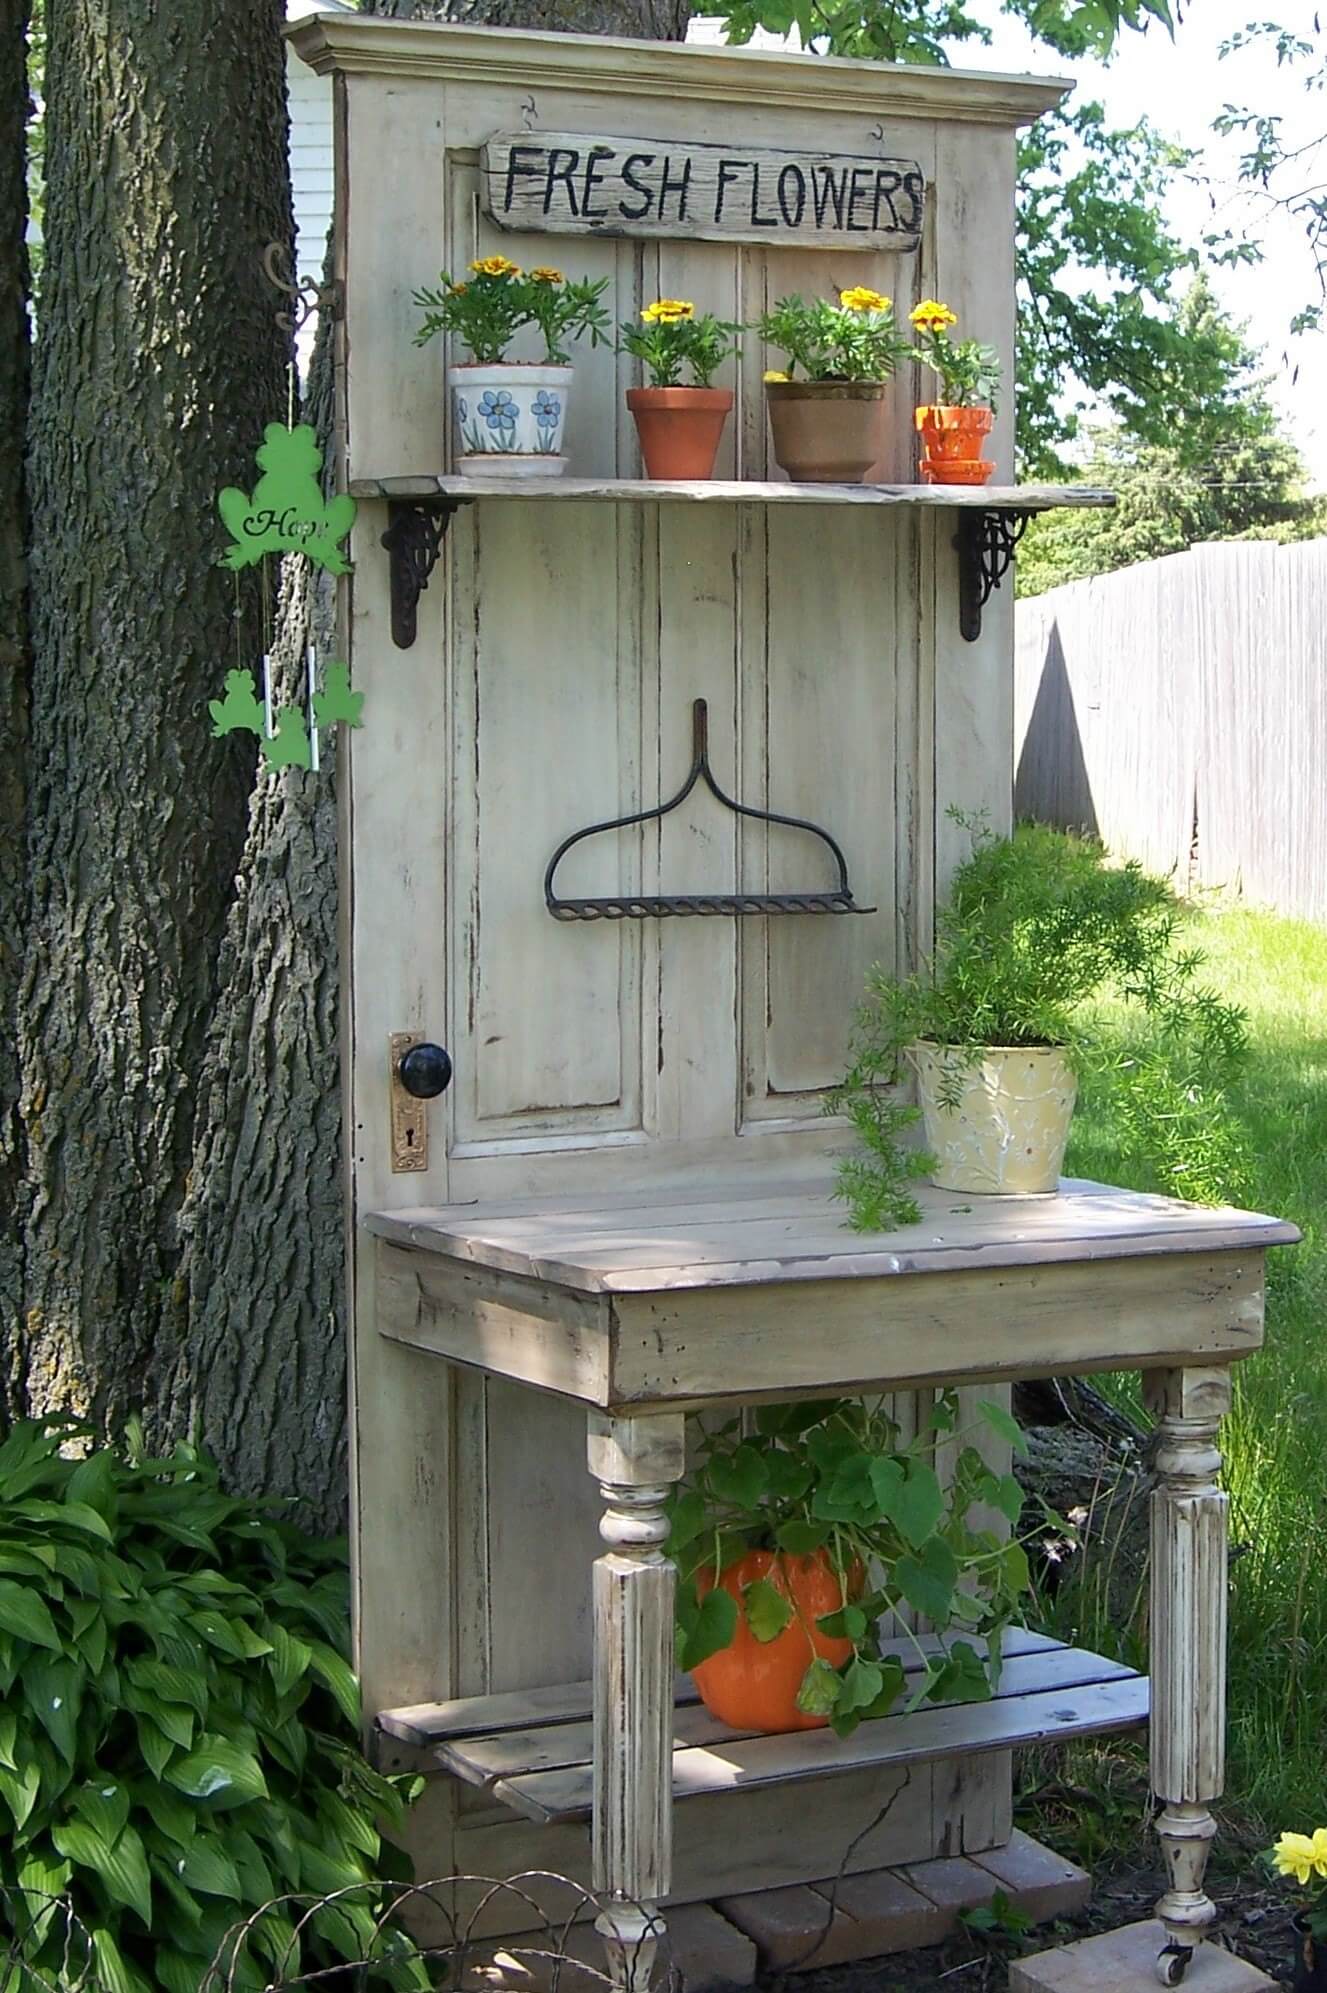 Potting Bench | Creative Repurposed Old Door Ideas & Projects For Your Backyard